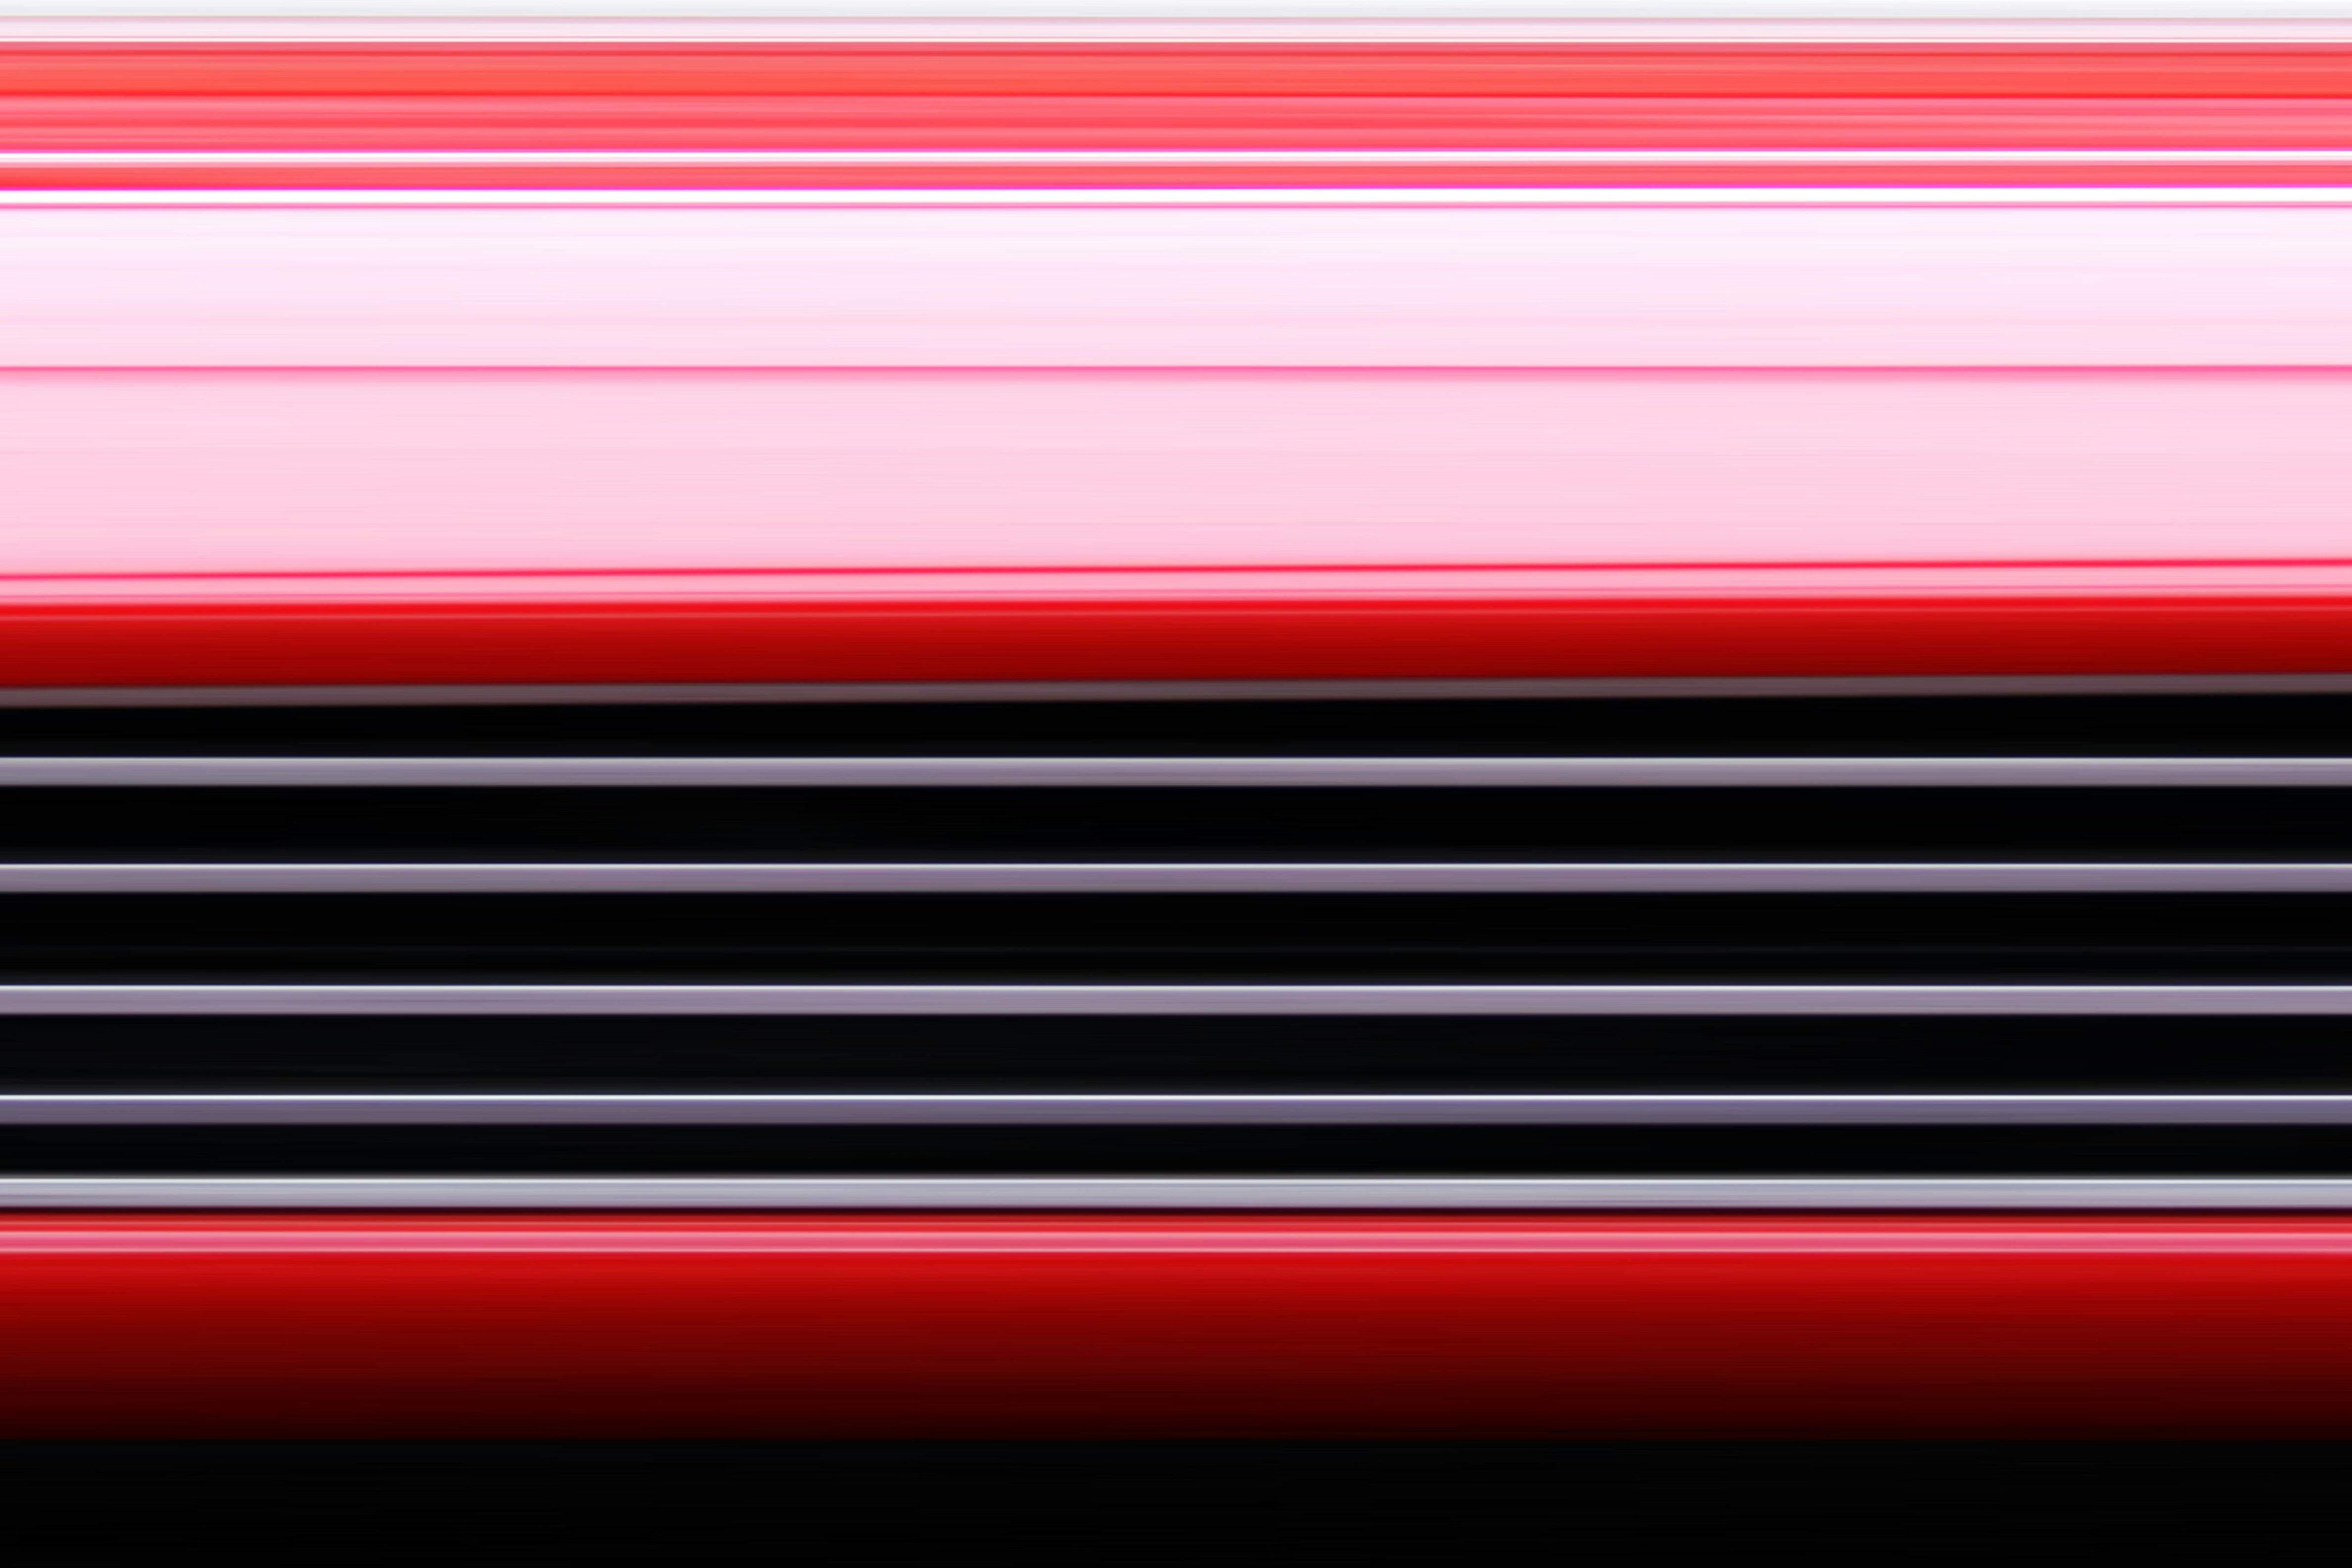 blue and red striped digital wallpaper